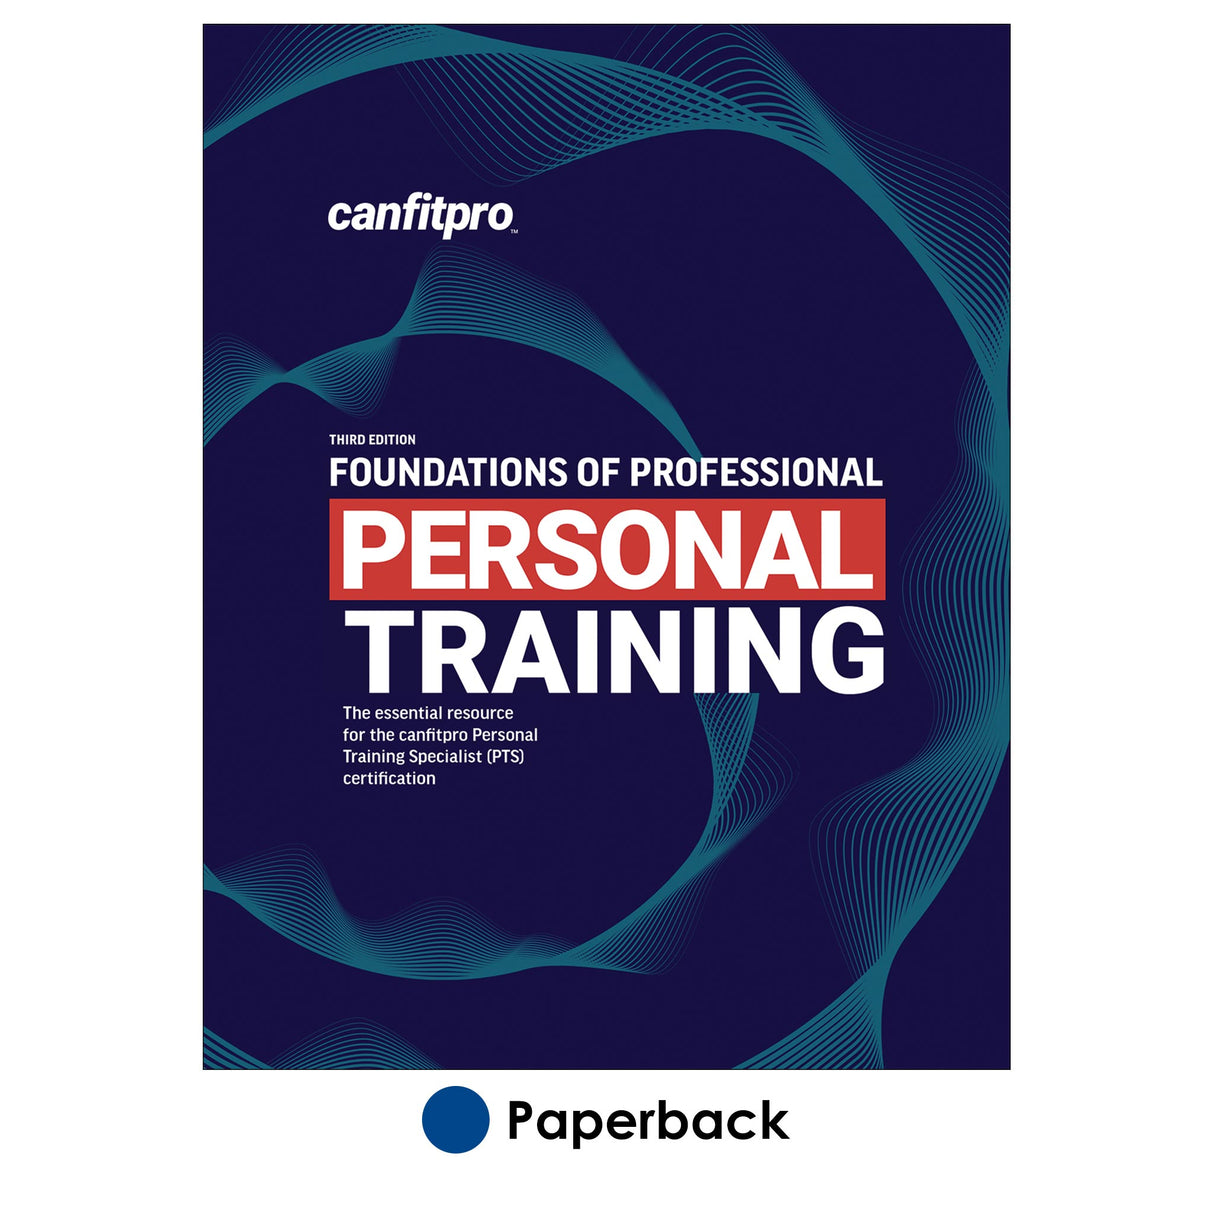 Foundations of Professional Personal Training-3rd Edition